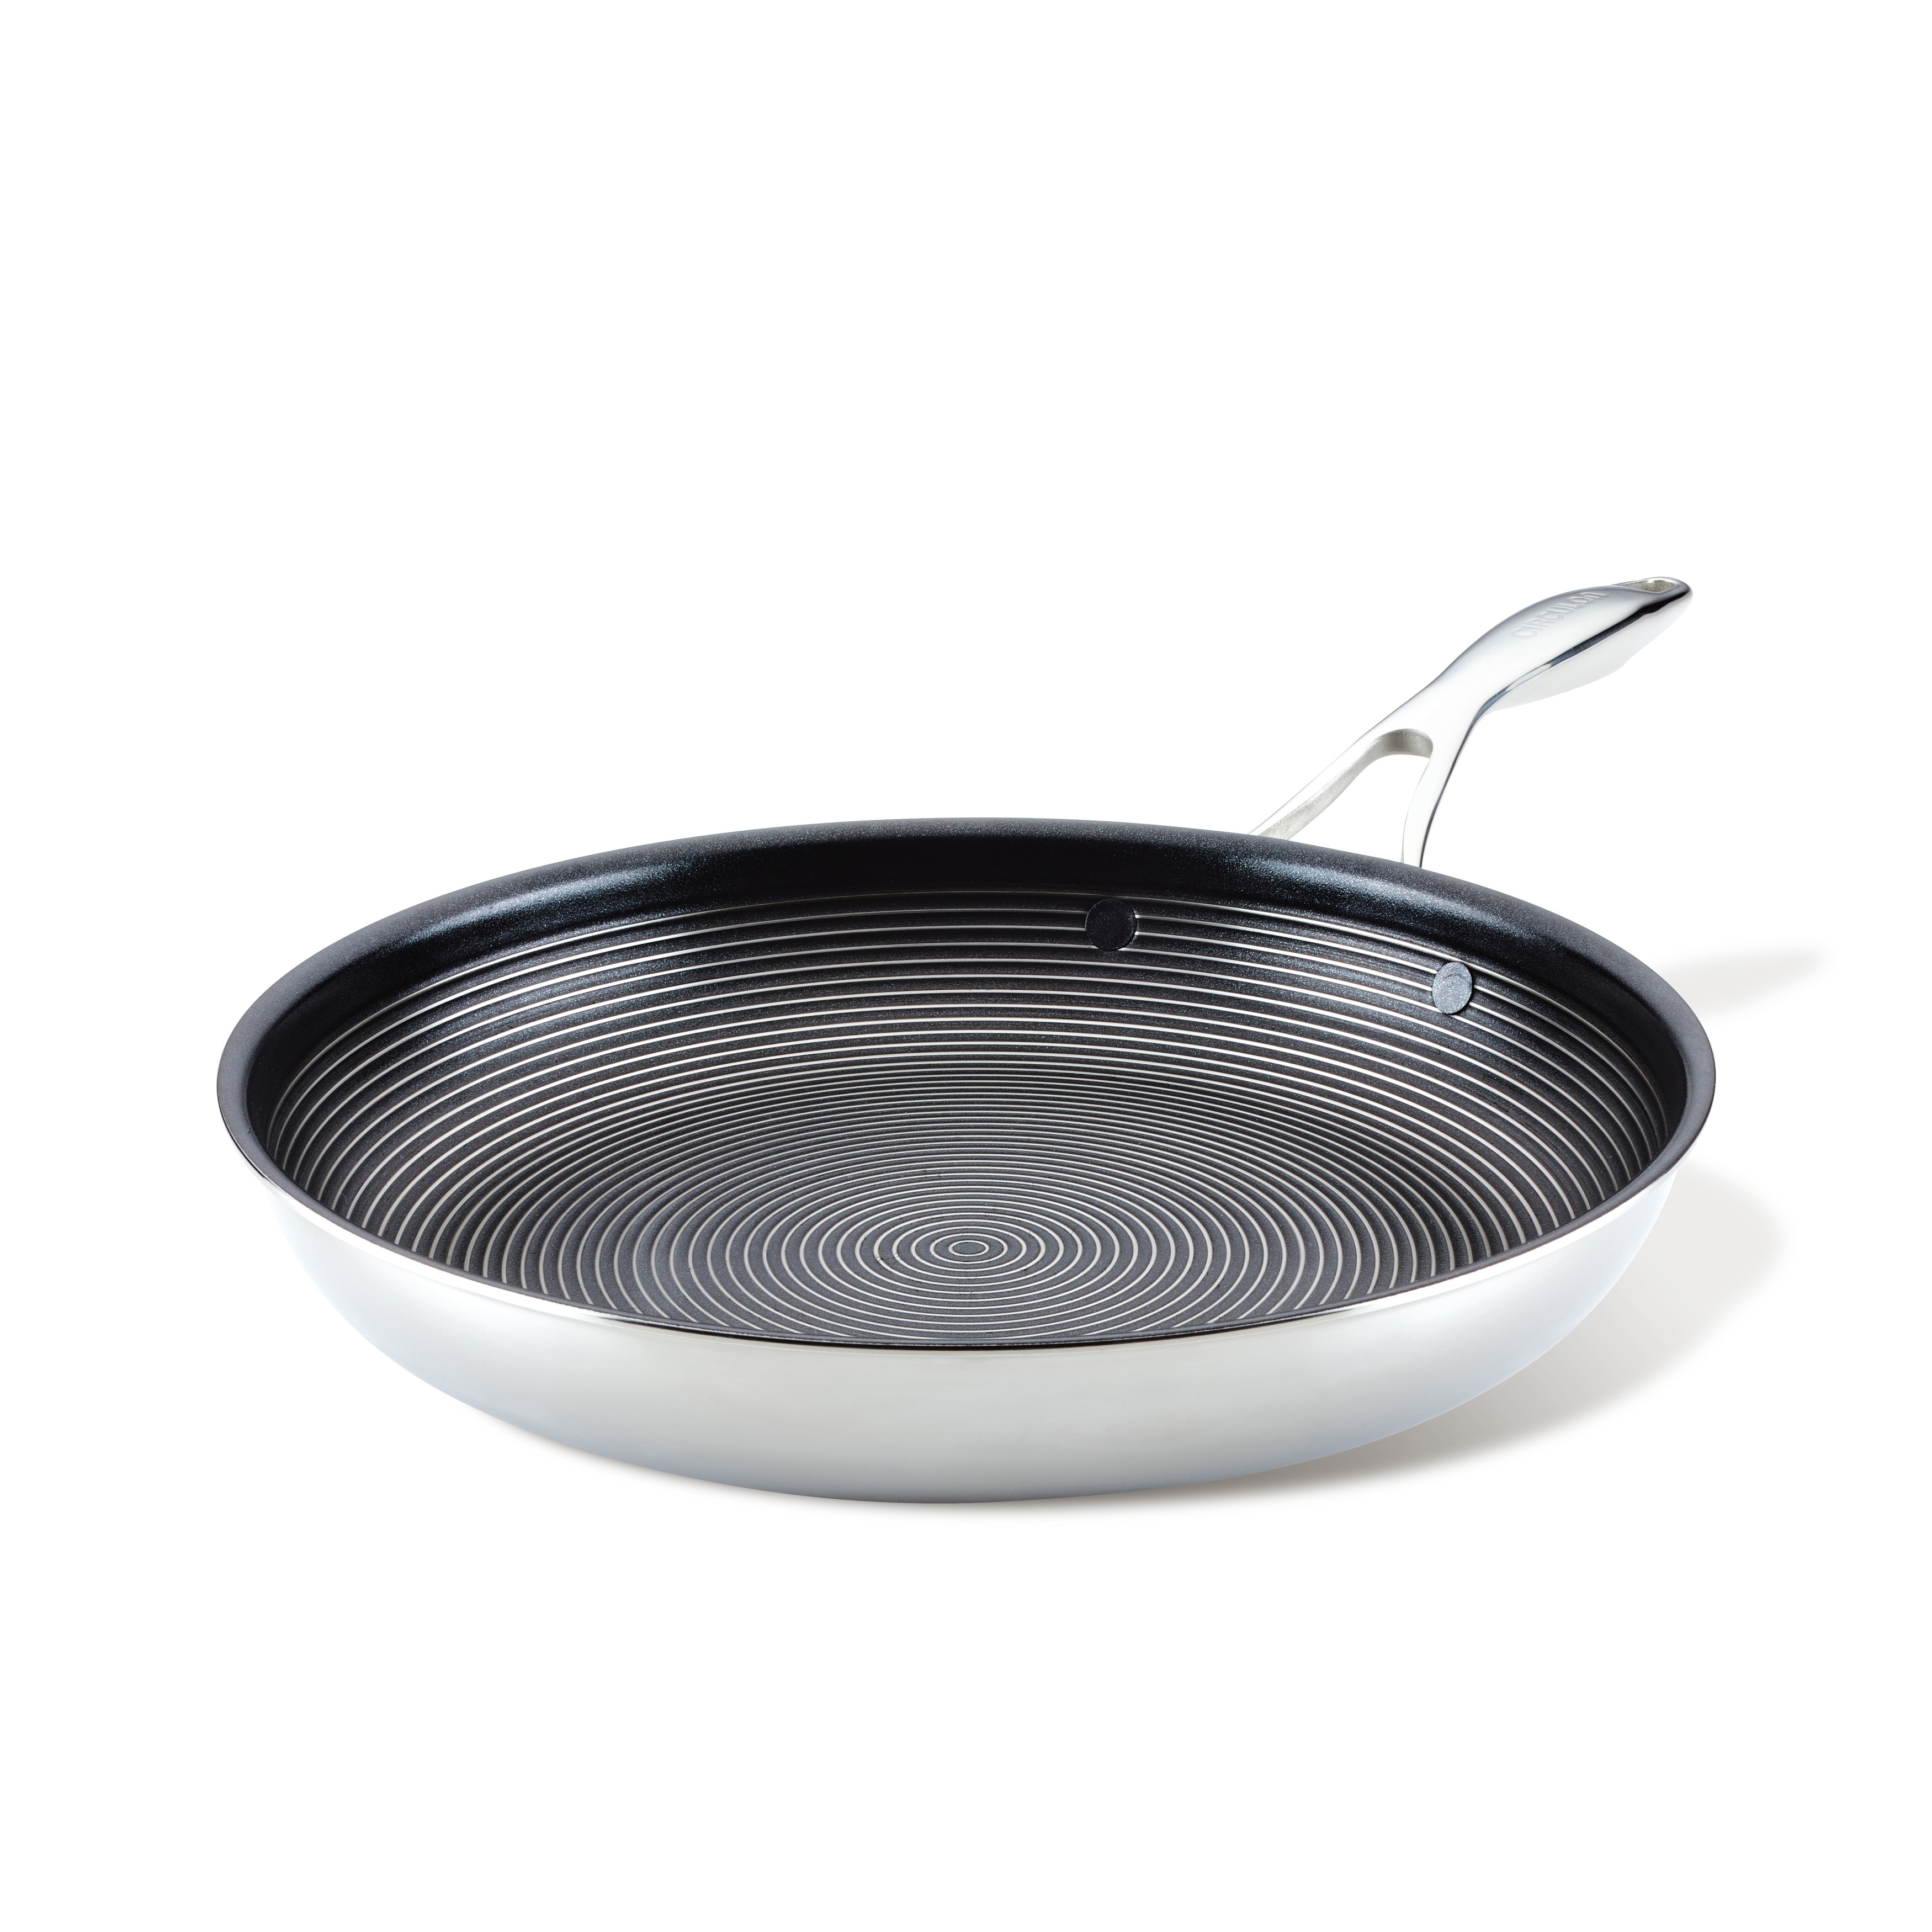 T-fal Simply Cook Nonstick Cookware, Fry Pan, 12.5, Black